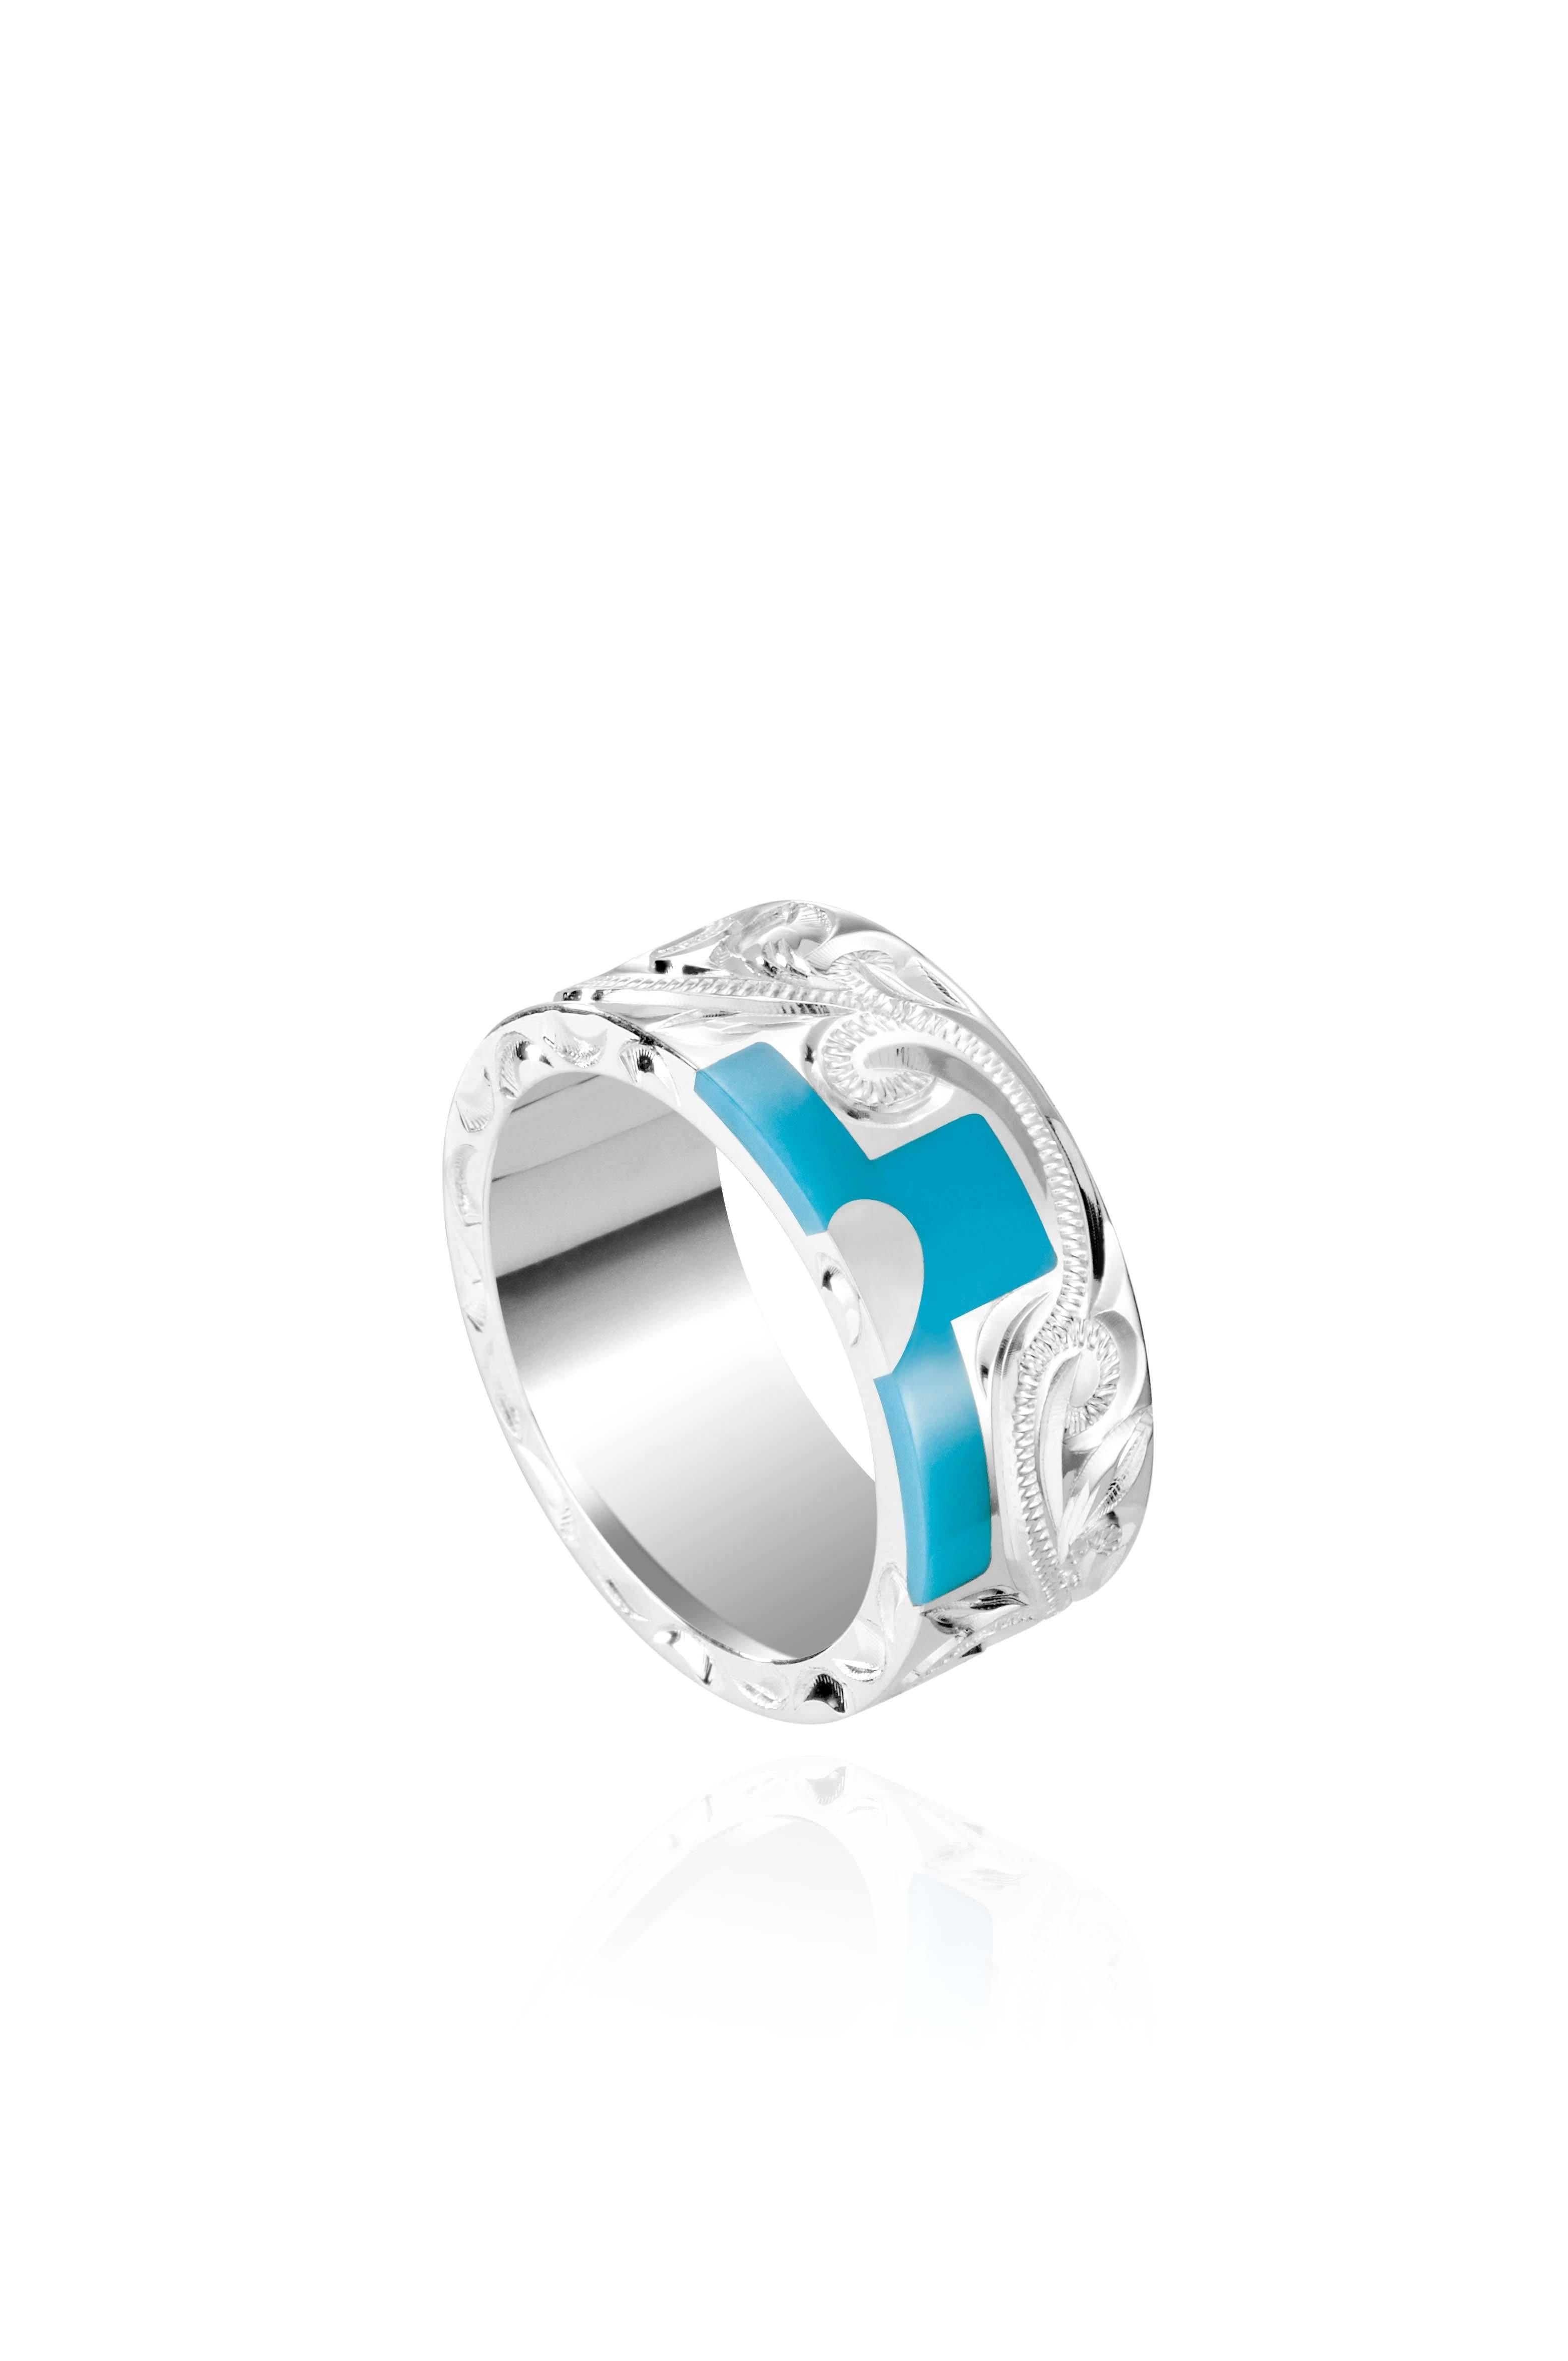 The picture shows a part of a set 925 sterling silver right half cross ring with hand-engravings, heart, and a turquoise gemstone.